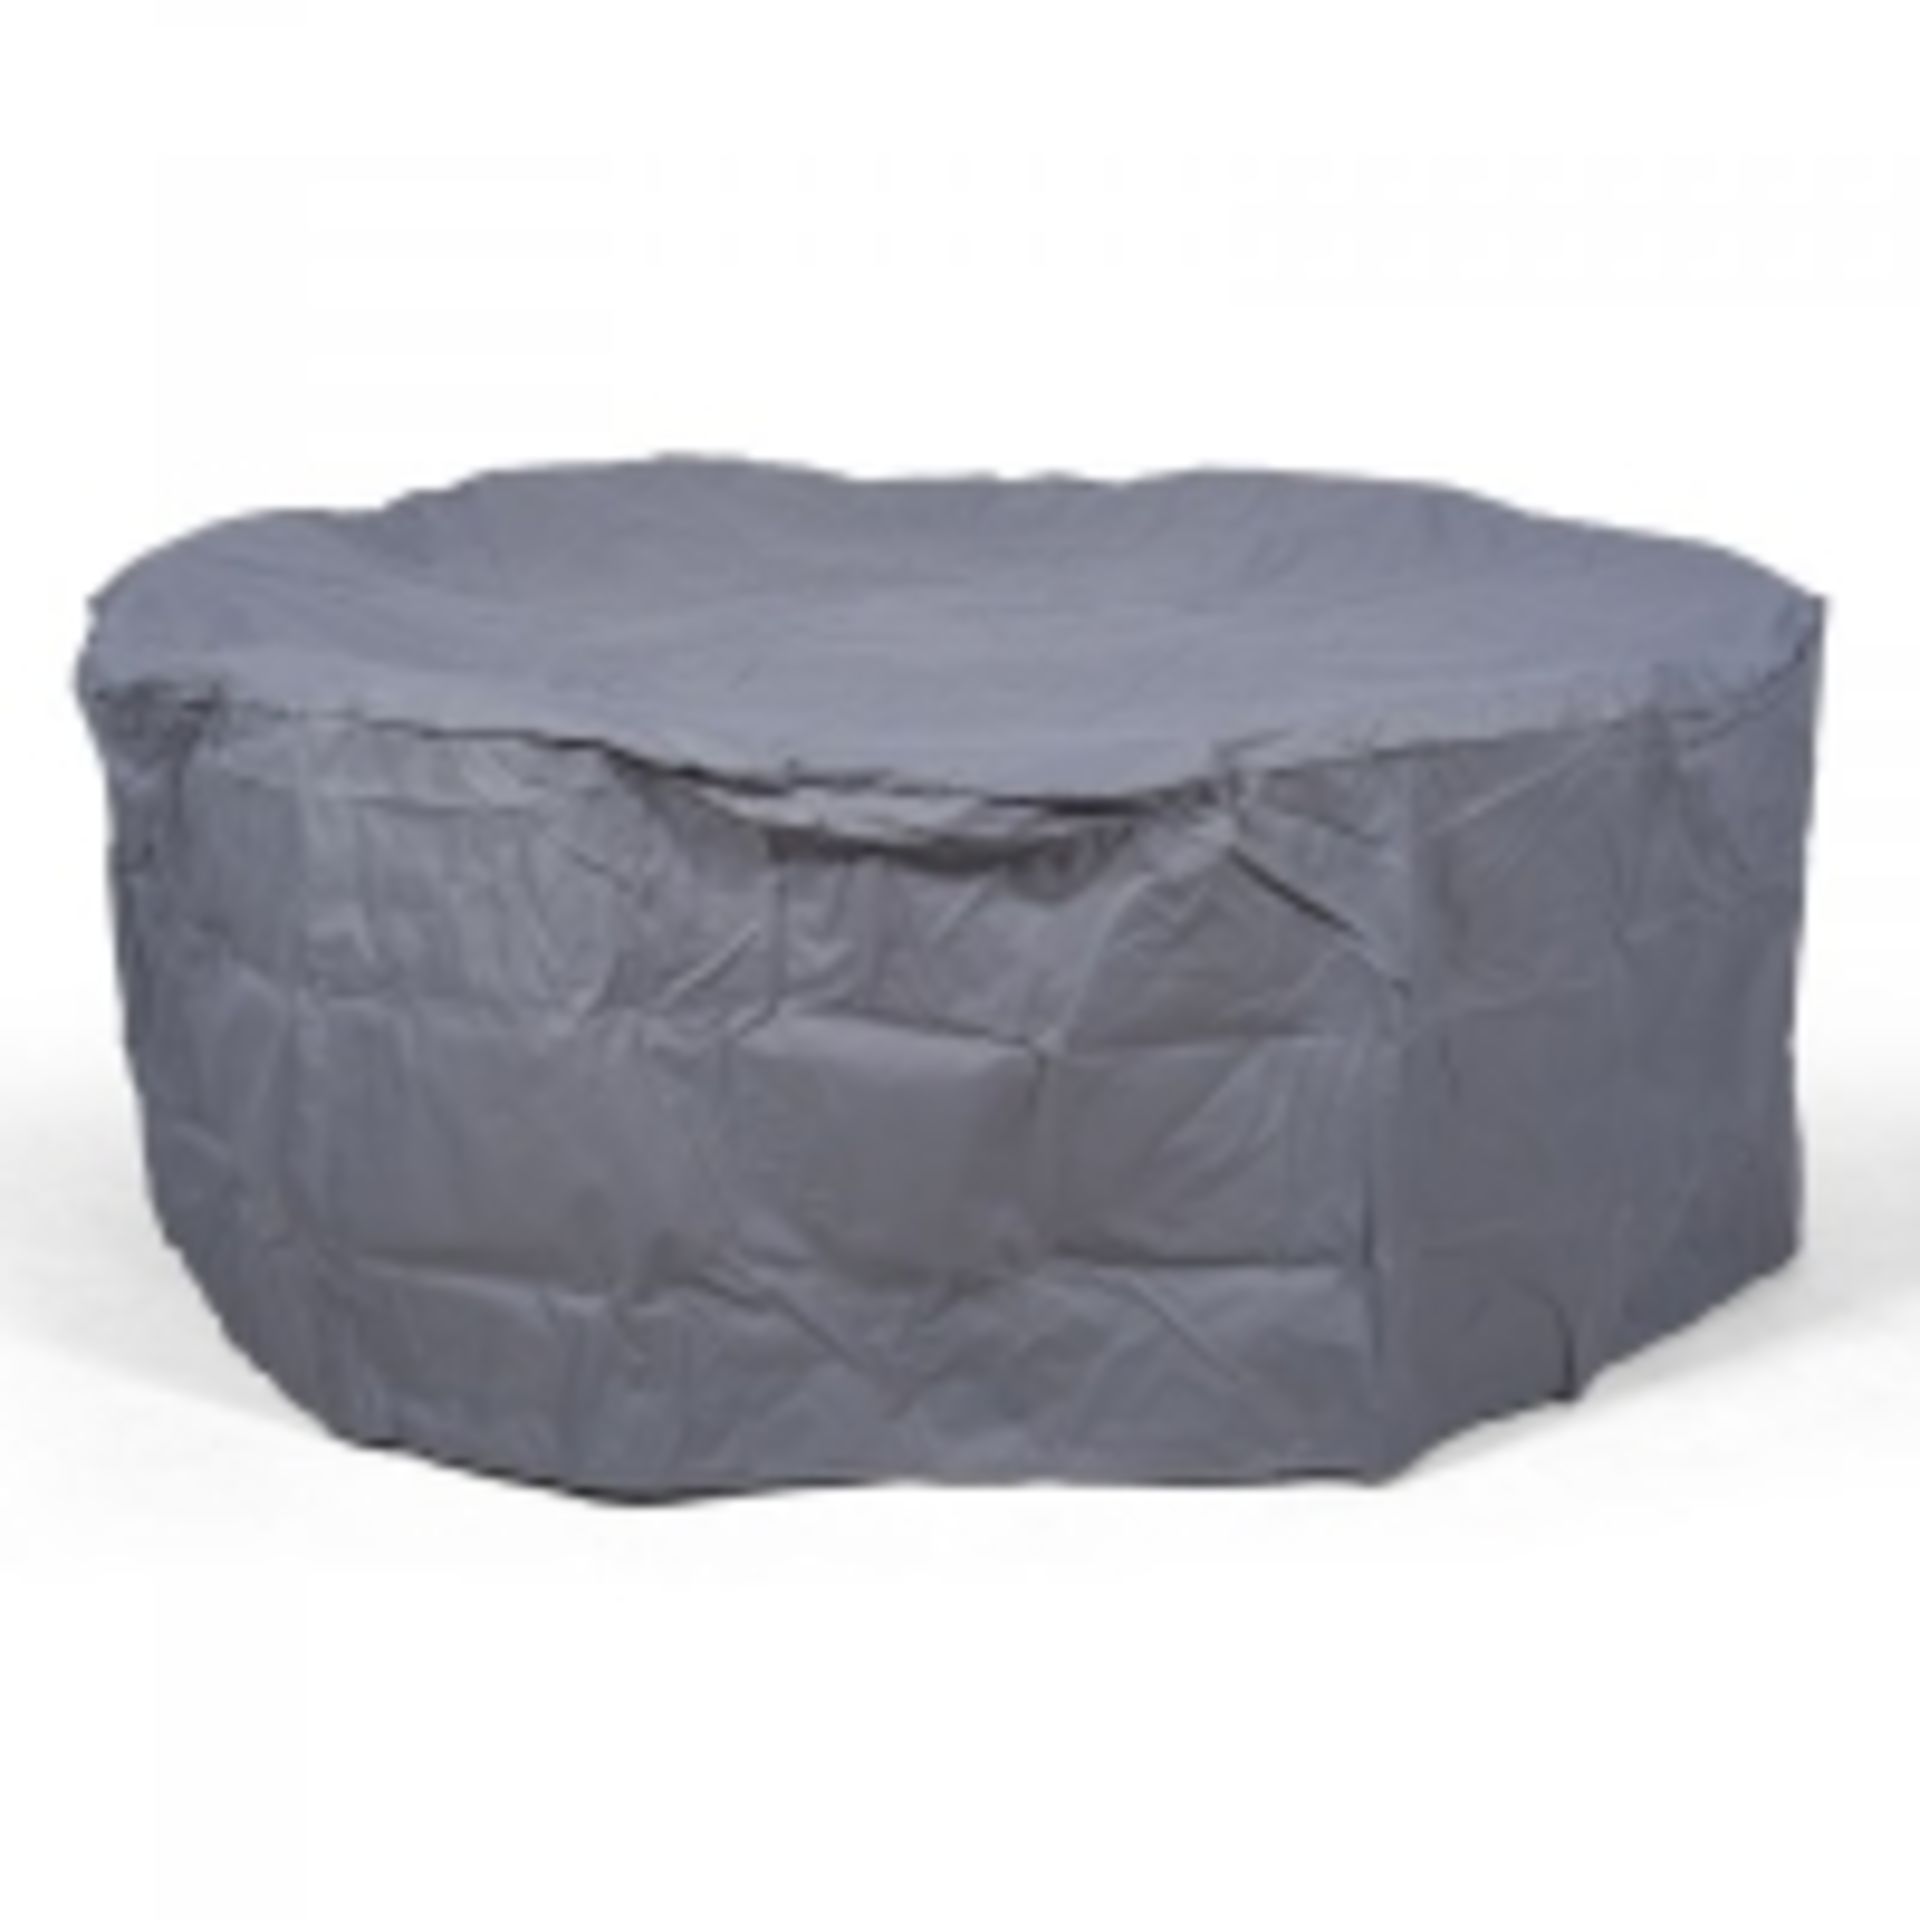 RATTAN SET 4 CHAIRS AND TABLE + ICEBUCKET+RAIN COVER - Image 5 of 5